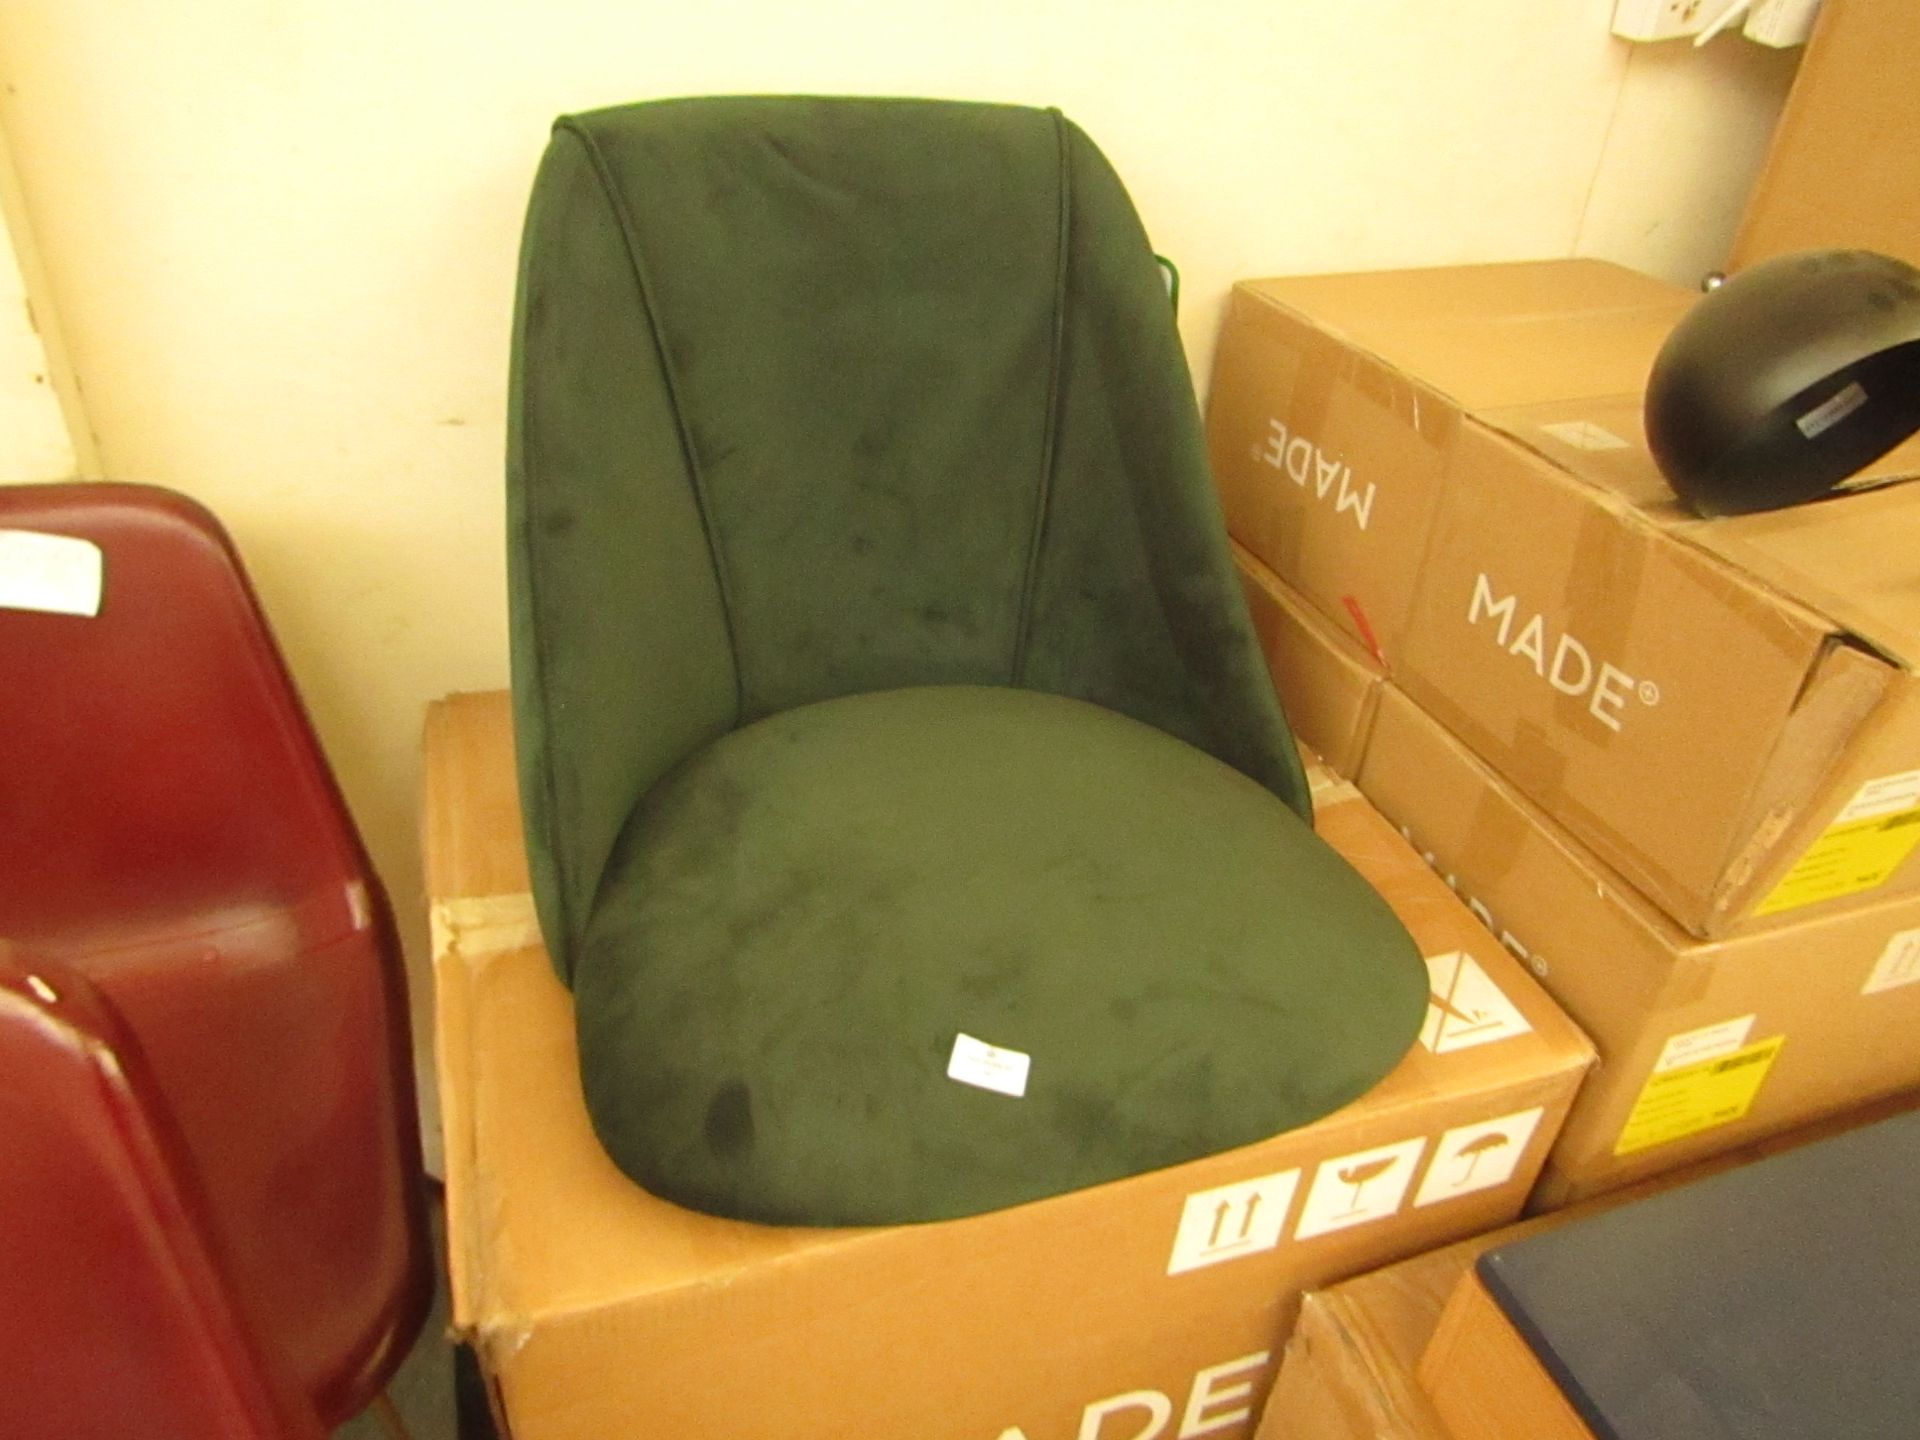 | 1X | MADE.COM SET OF 2 LULE DINING CHAIRS | PINE GREEN VELVET | UNCHECKED & BOXED | RRP £275 |